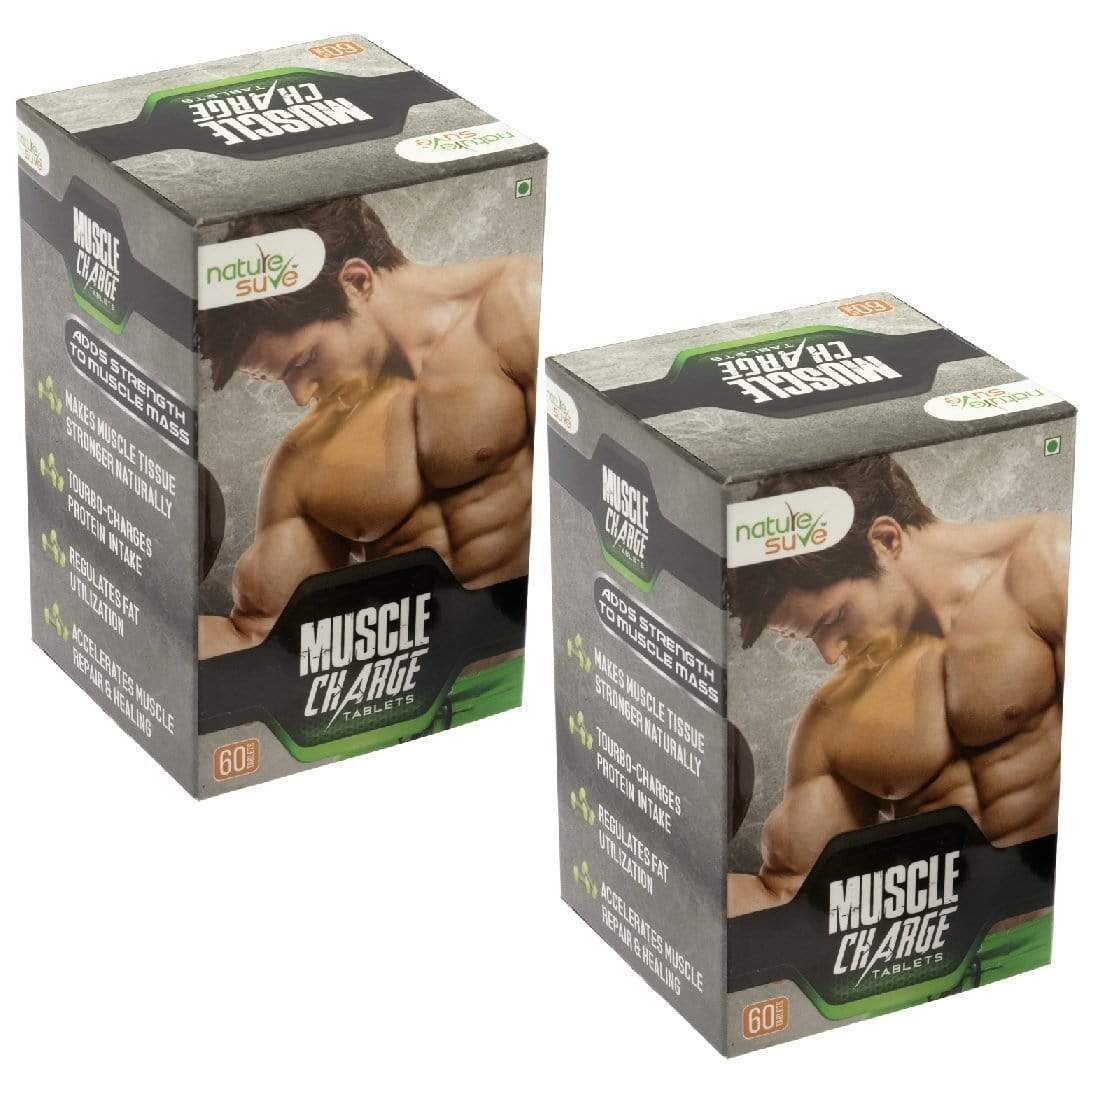 Nature Sure Pack of 2 Nature Sure Muscle Charge Tablets For Faster Muscle Recovery & Protein Absorption